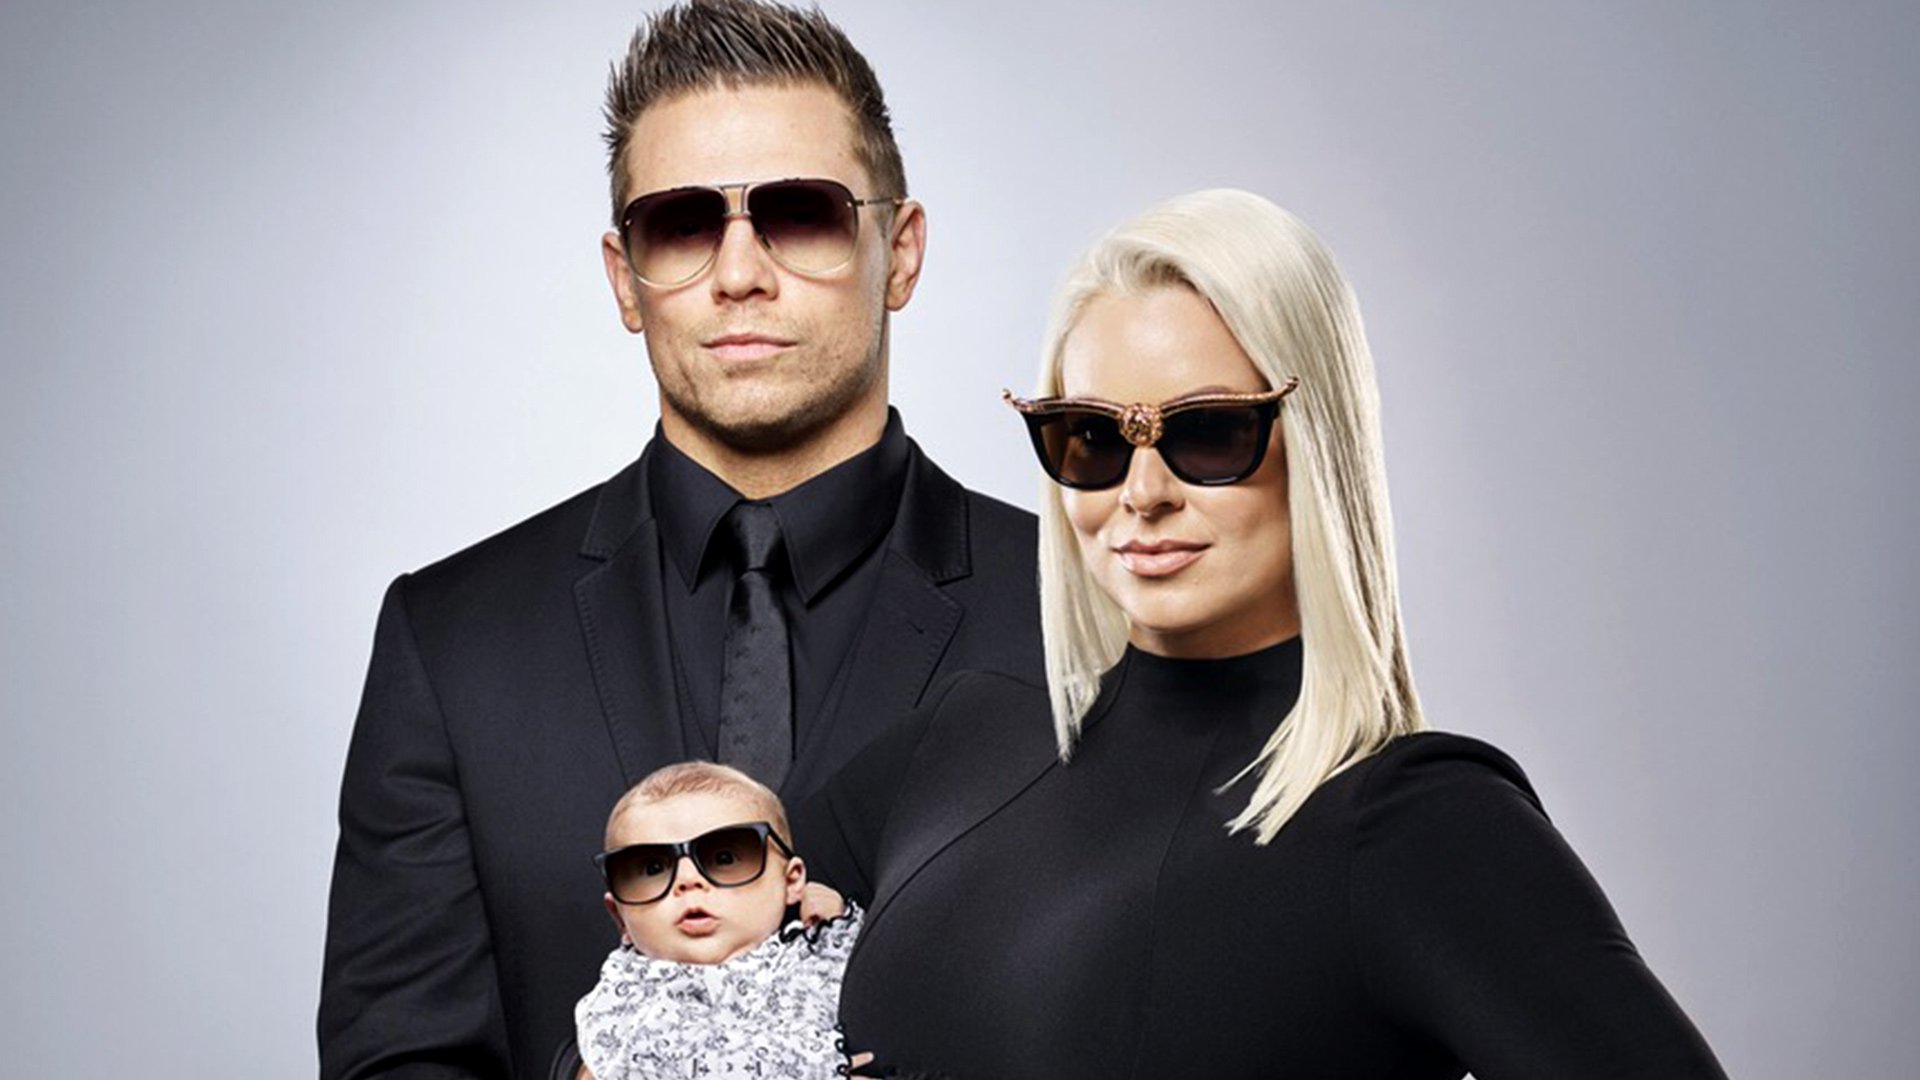 Welcome to the most Must-See reality show in TV history, Miz & Mrs....